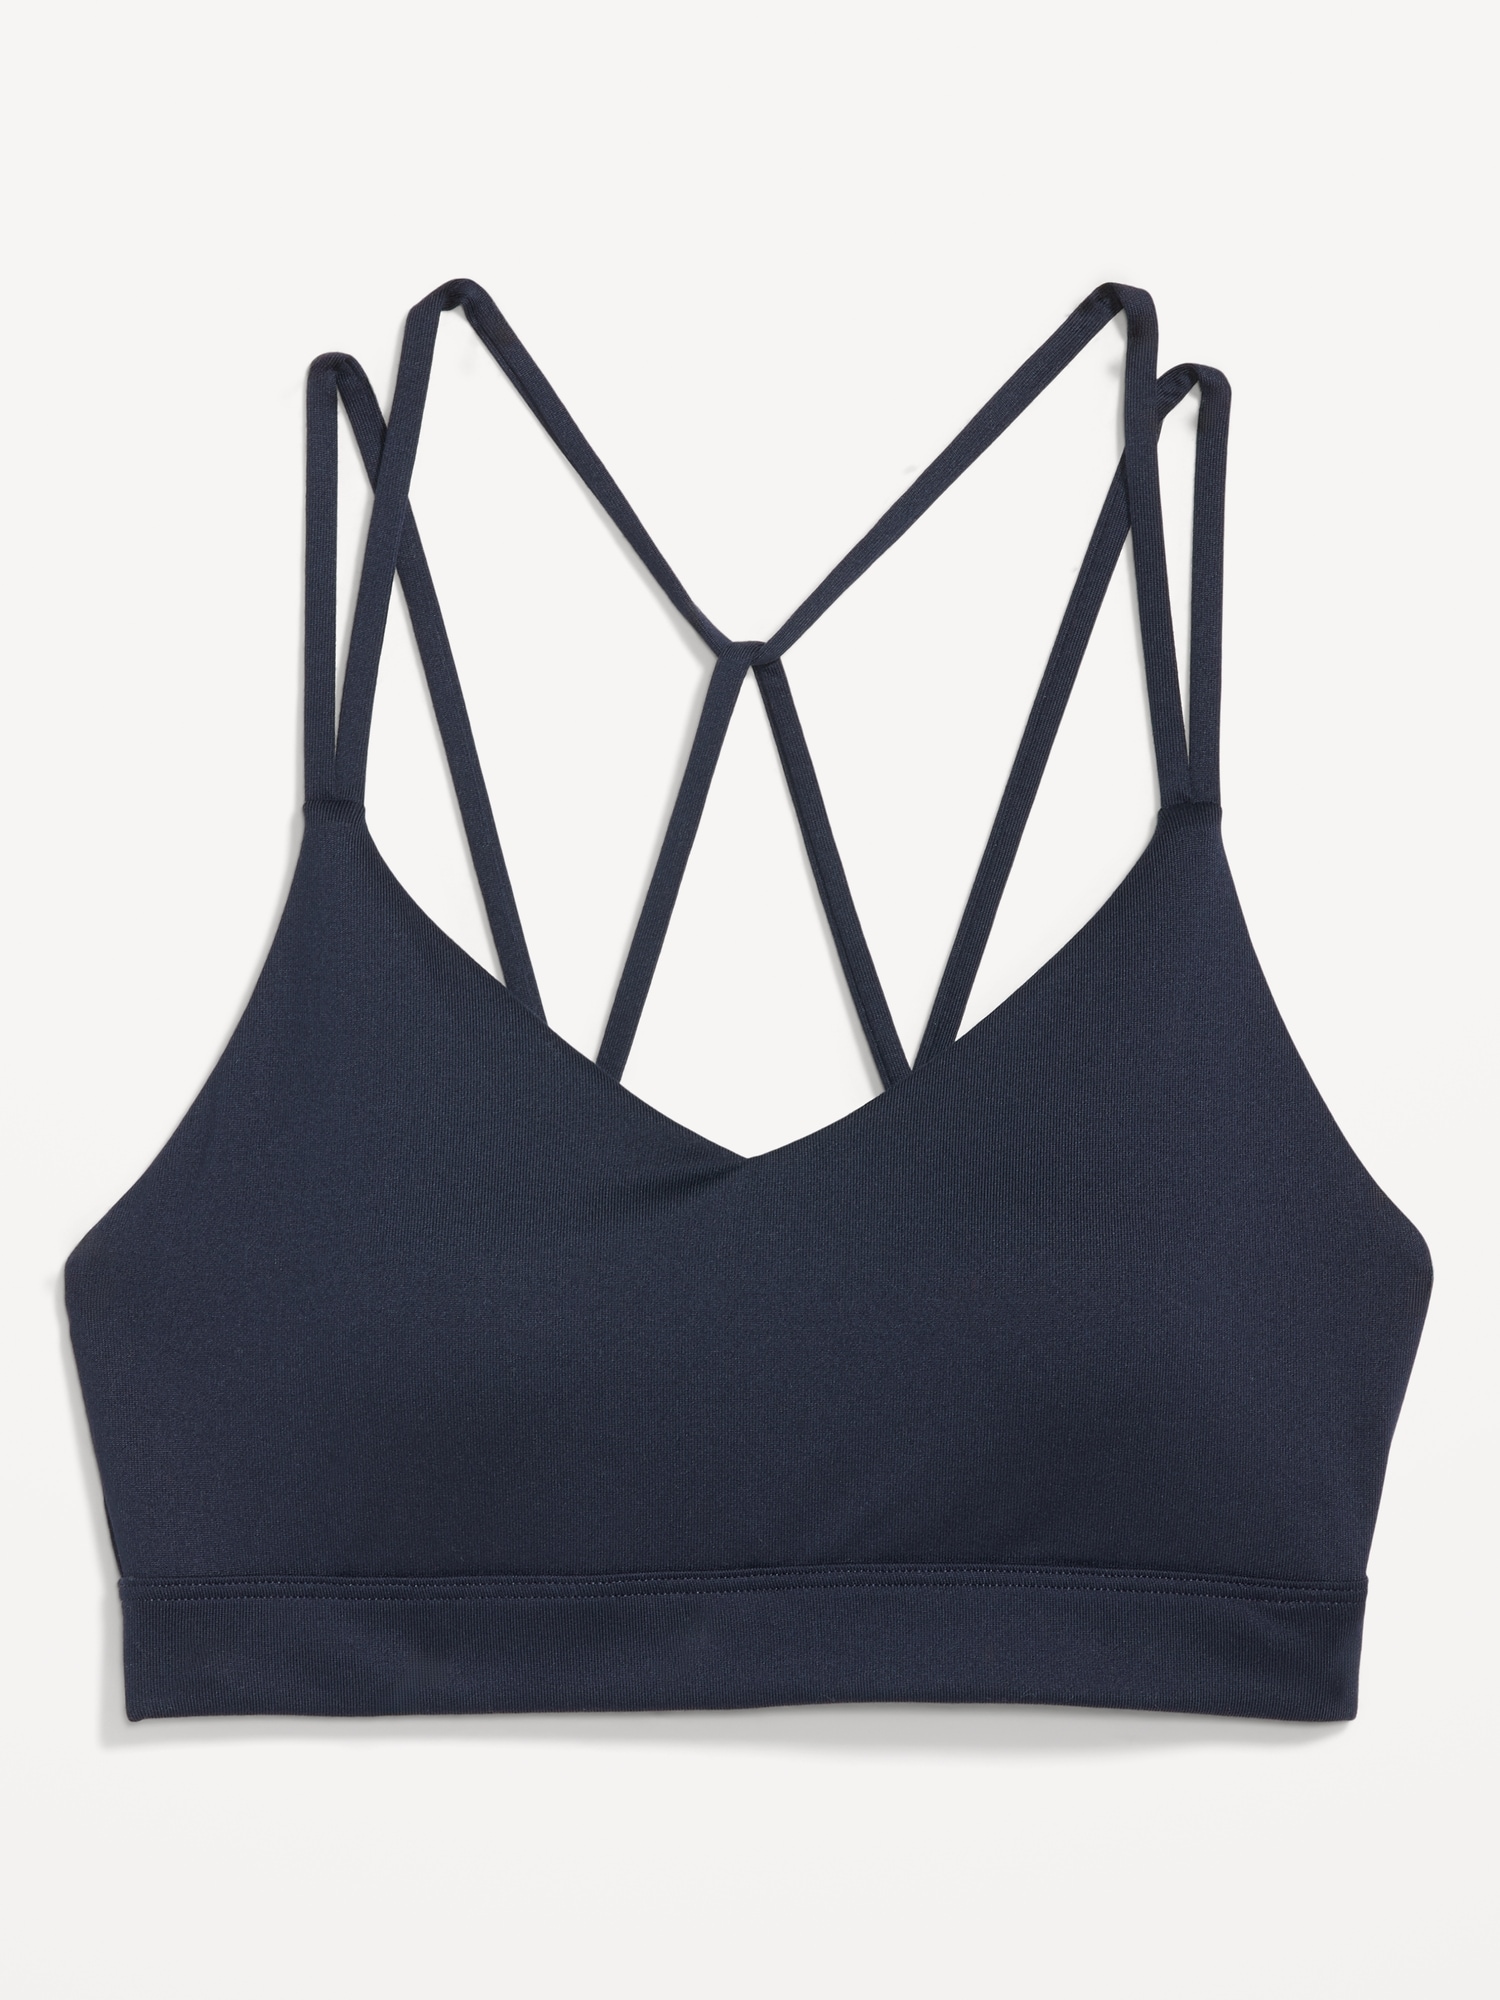 MotoRun Strappy Bralette Sports Bras for Women Push Up Front Sexy Padded  Cute Bra Navy Blue X-Small at  Women's Clothing store